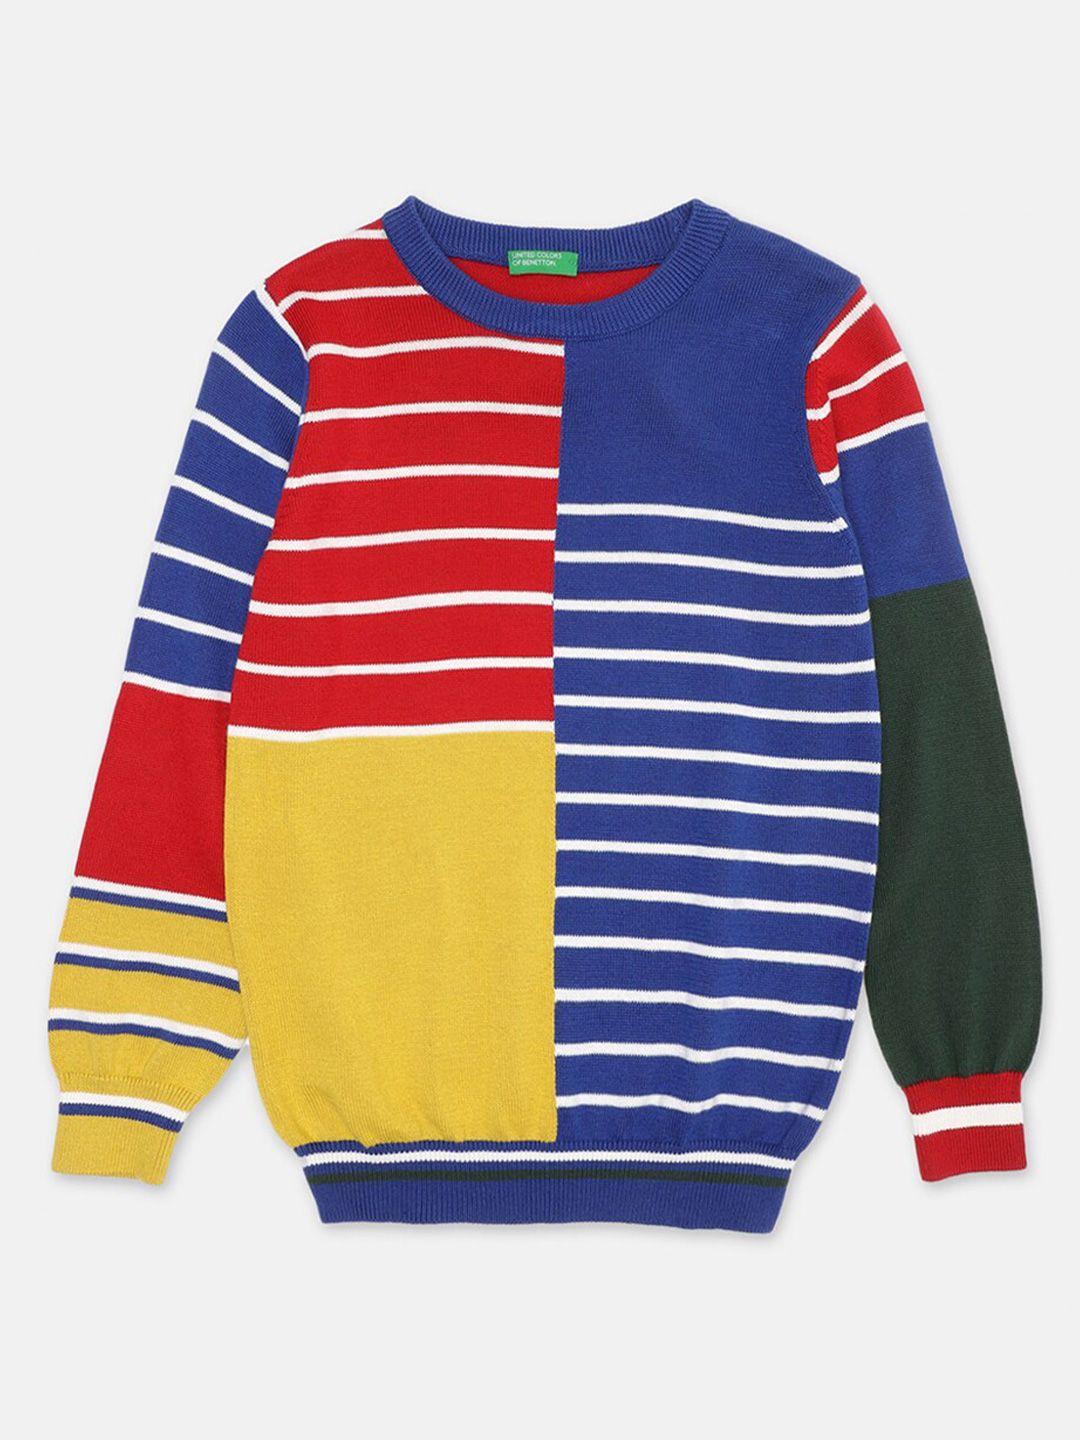 United Colors of Benetton Boys Blue & Red Striped Pullover